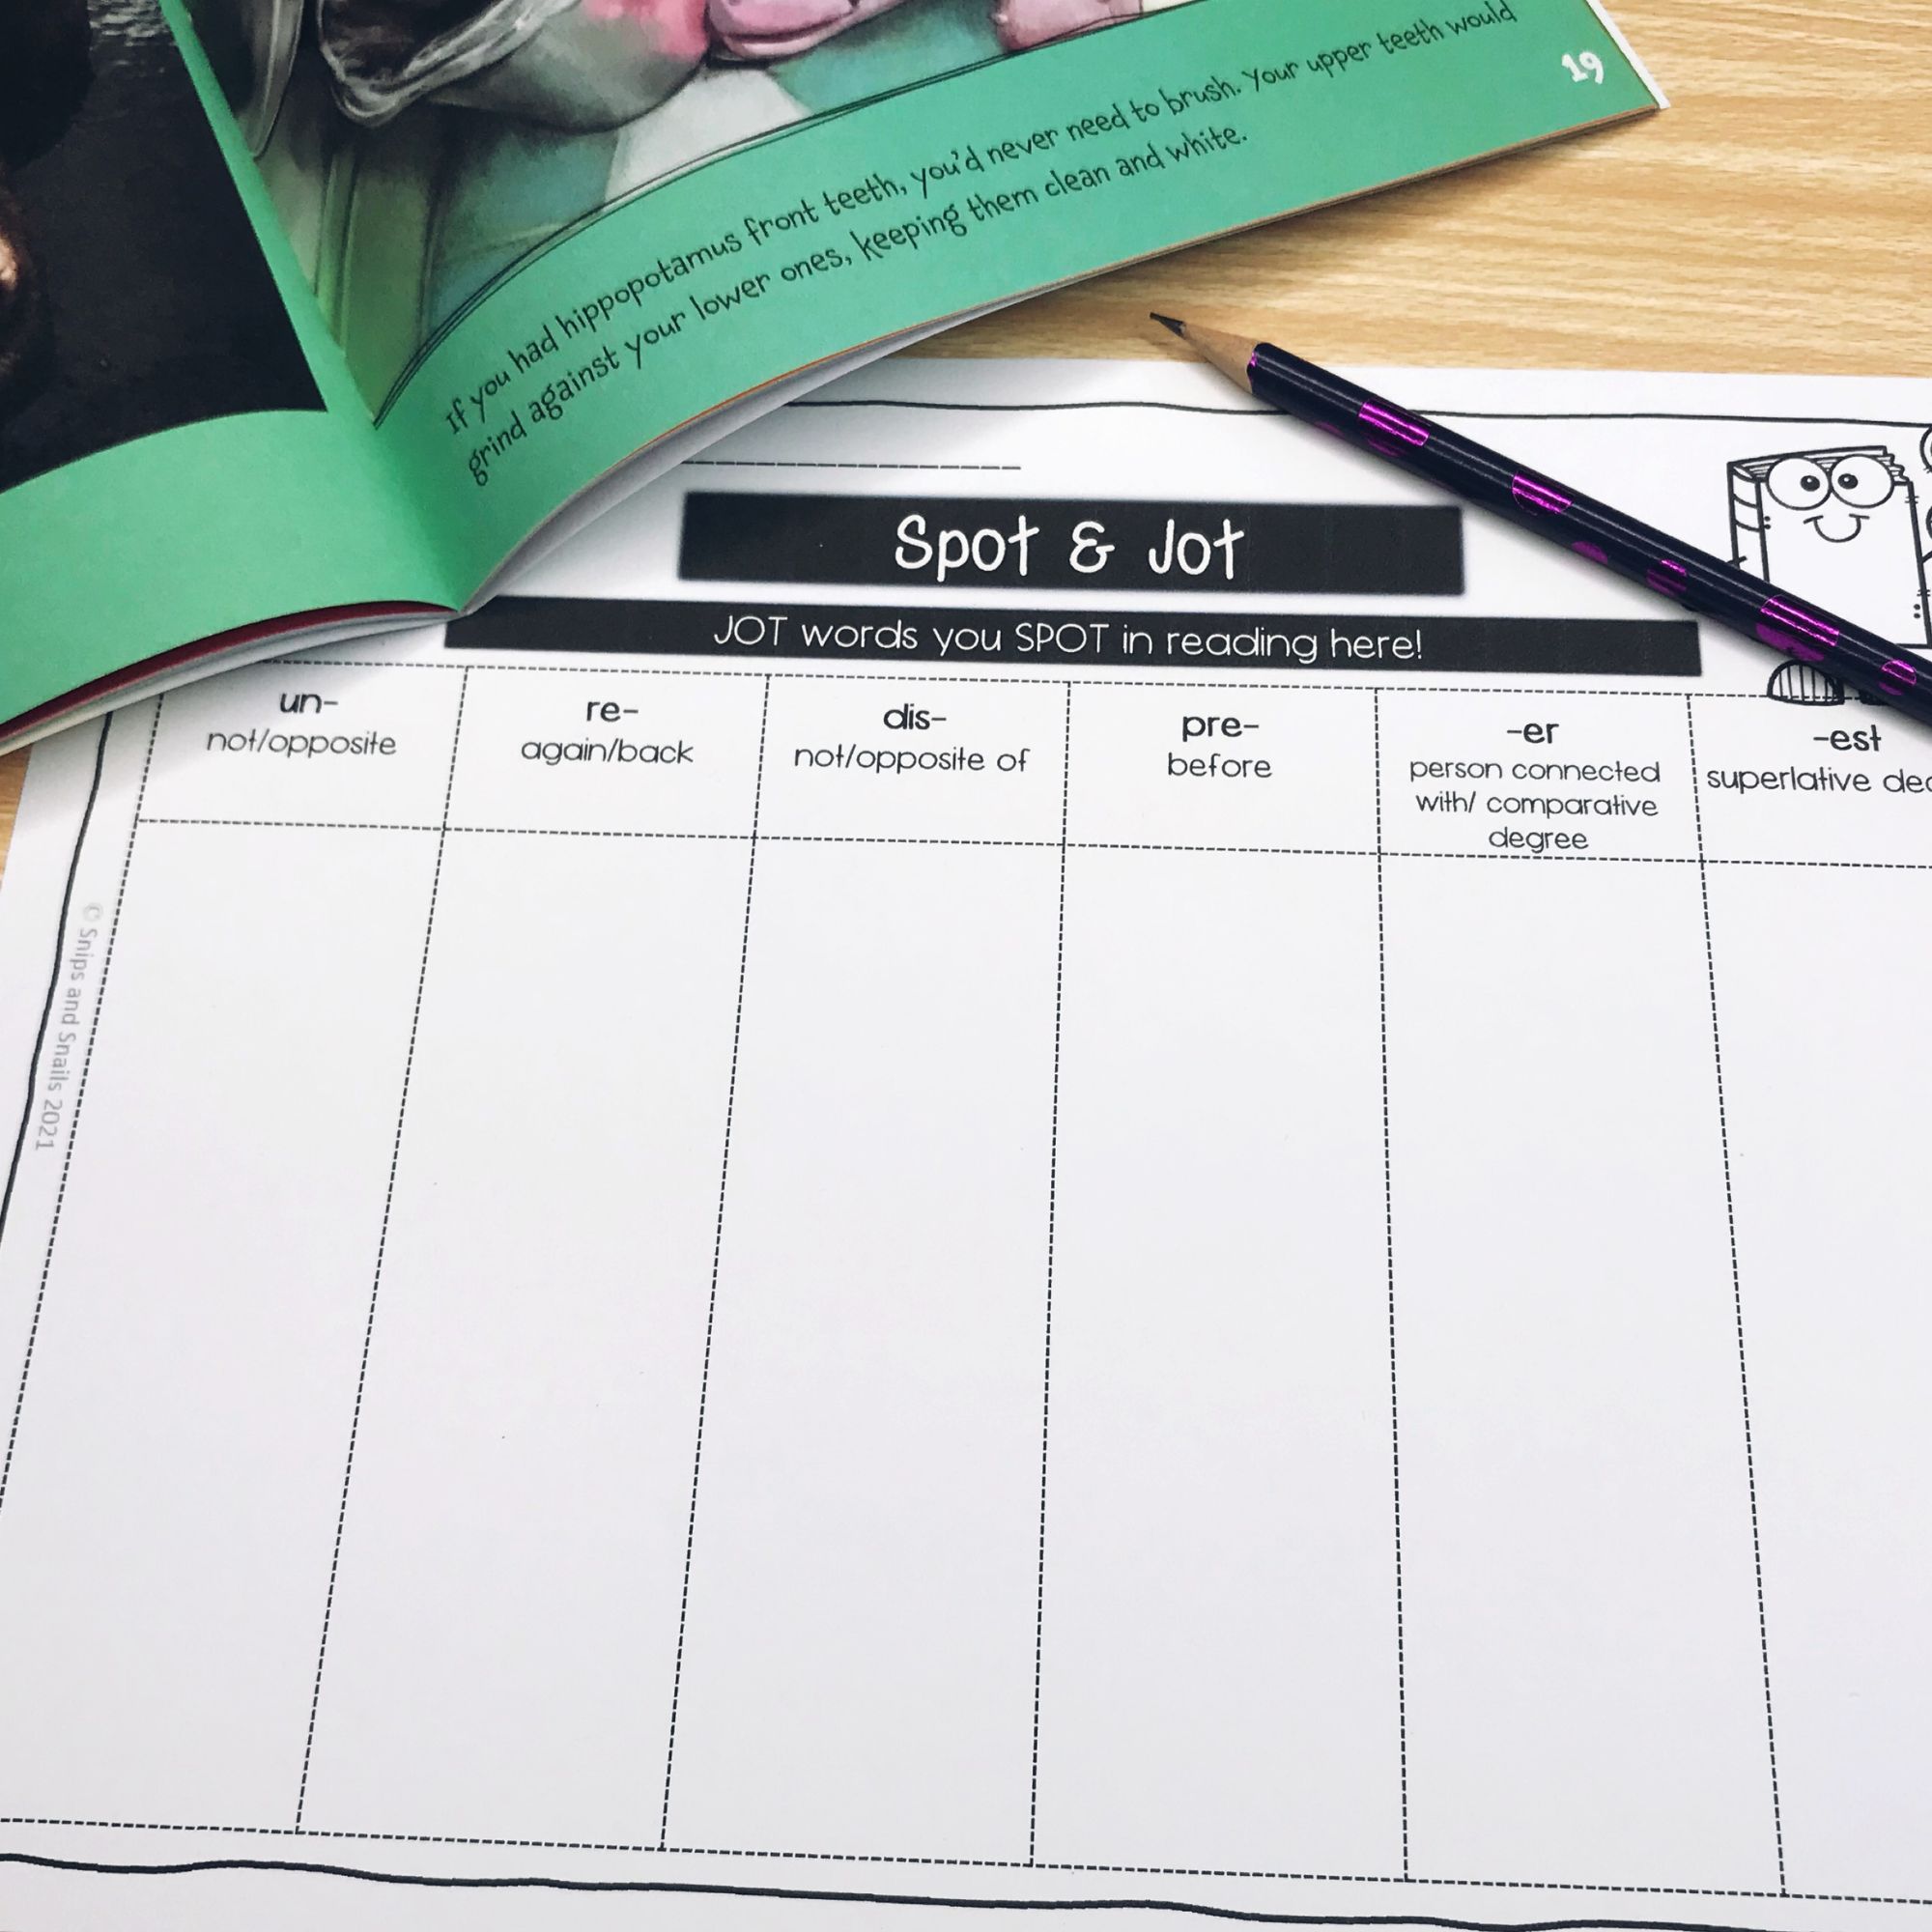 spot and jot scavenger hunt activity for prefixes and suffixes